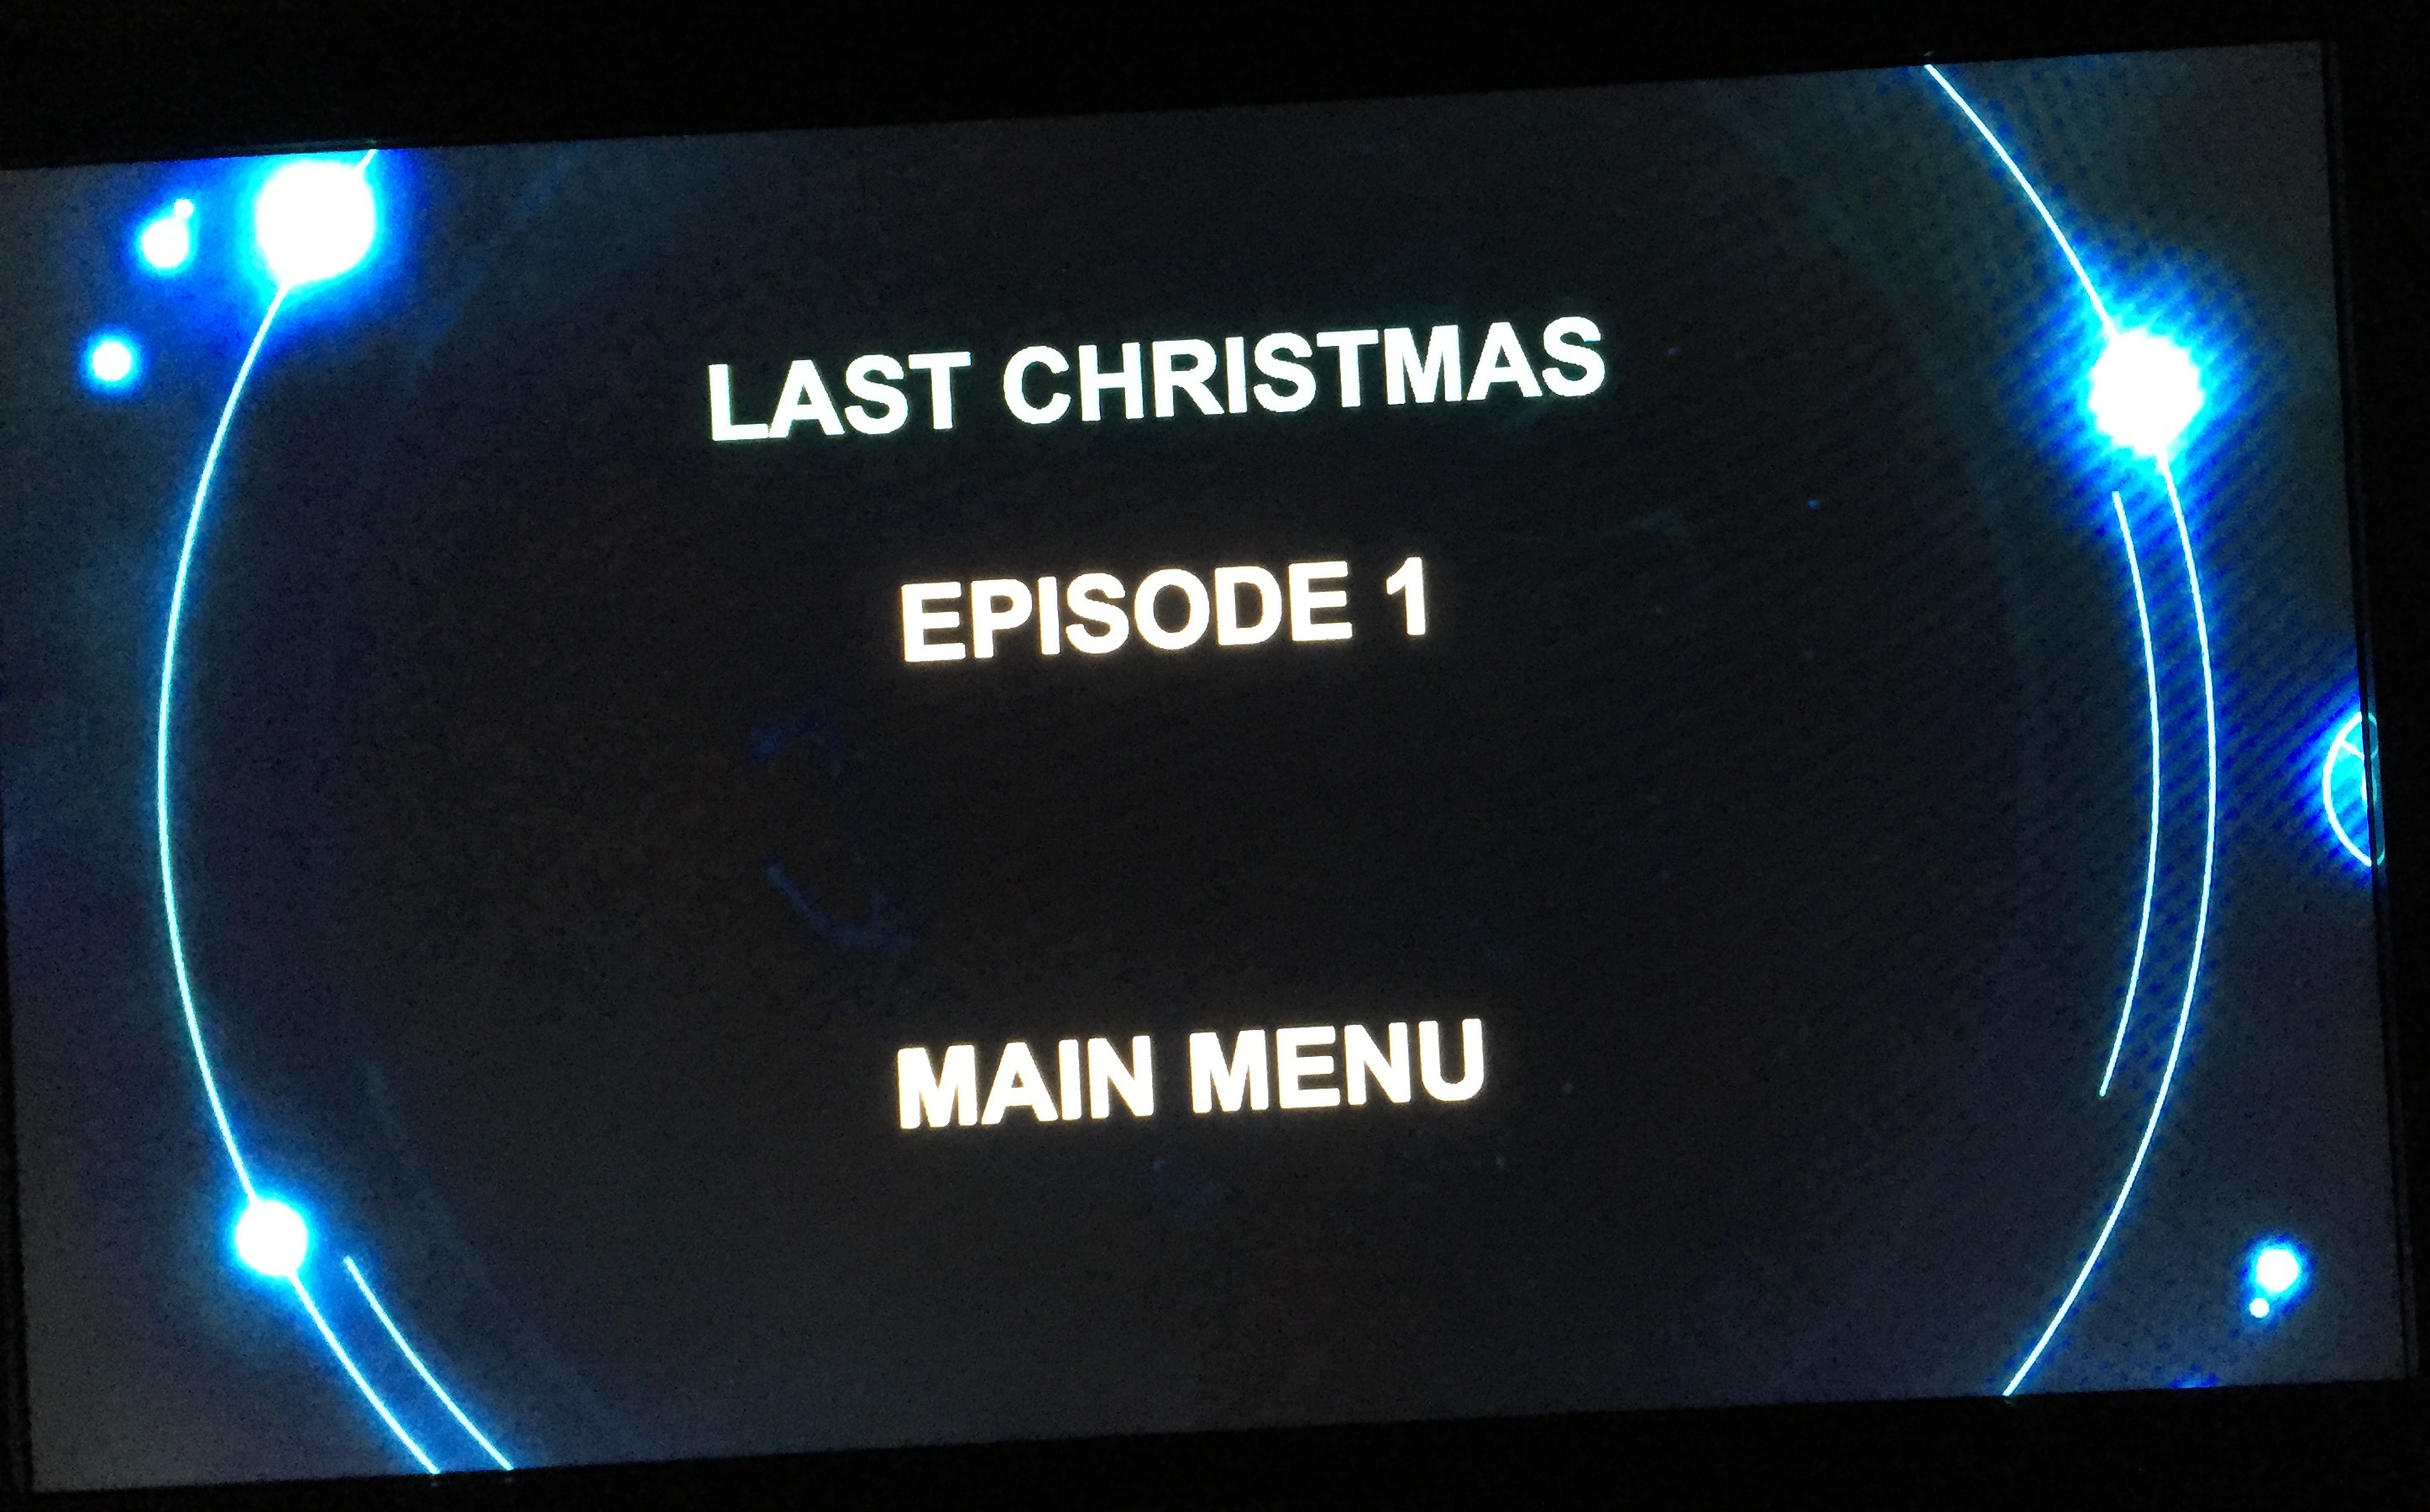 Doctor Who DVD Audio Menu Screen - Episode Menu, showing Last Christmas and Episode 1